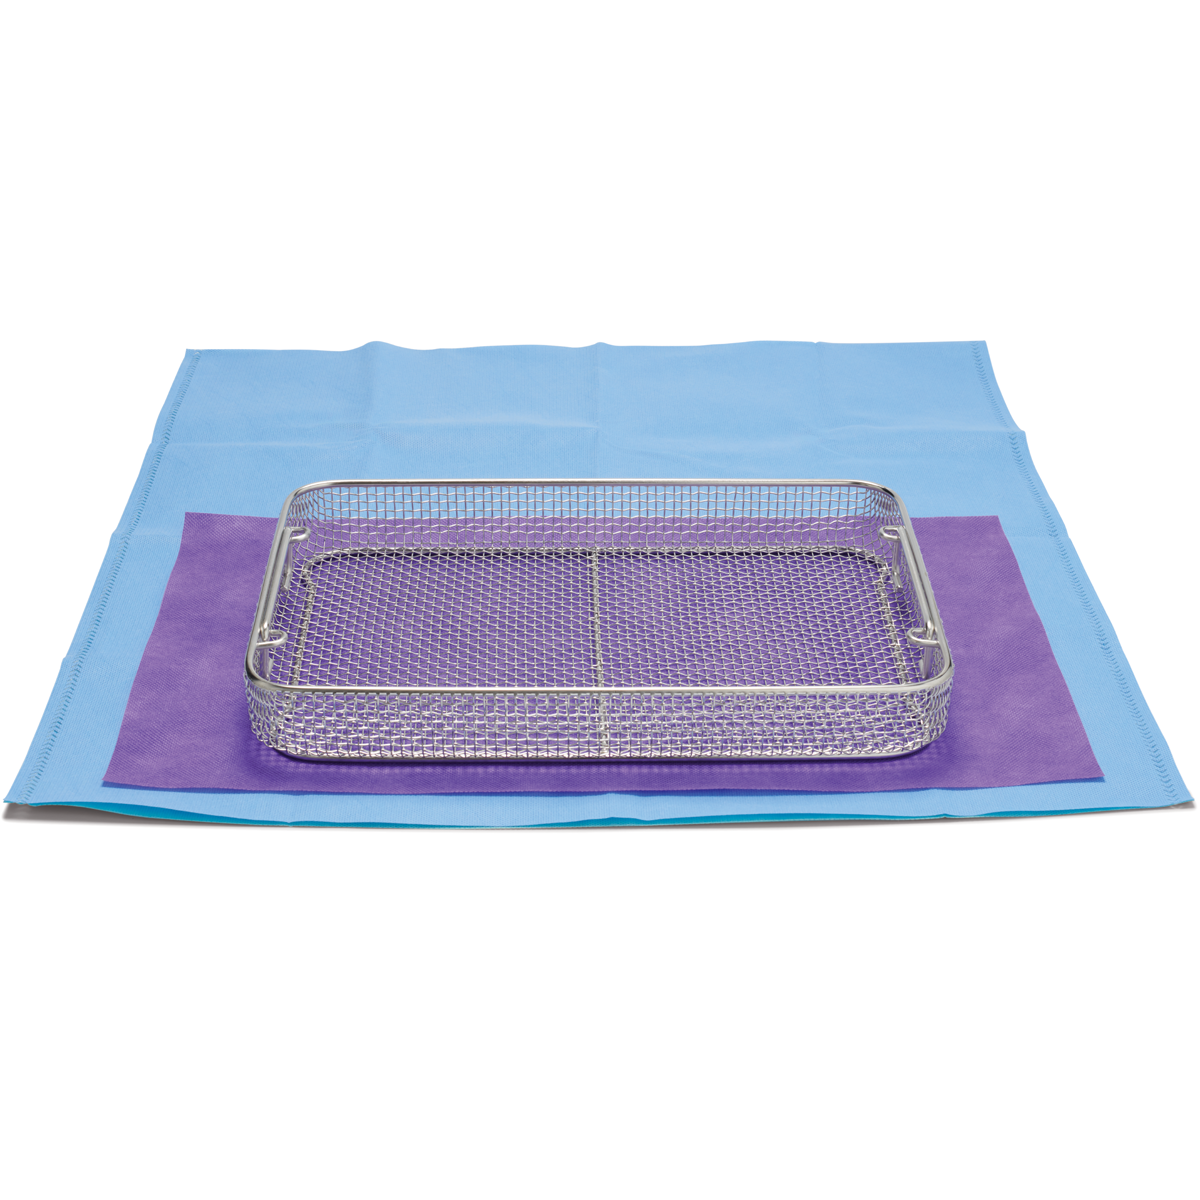 Tray Mat (steam sterilization only) Image